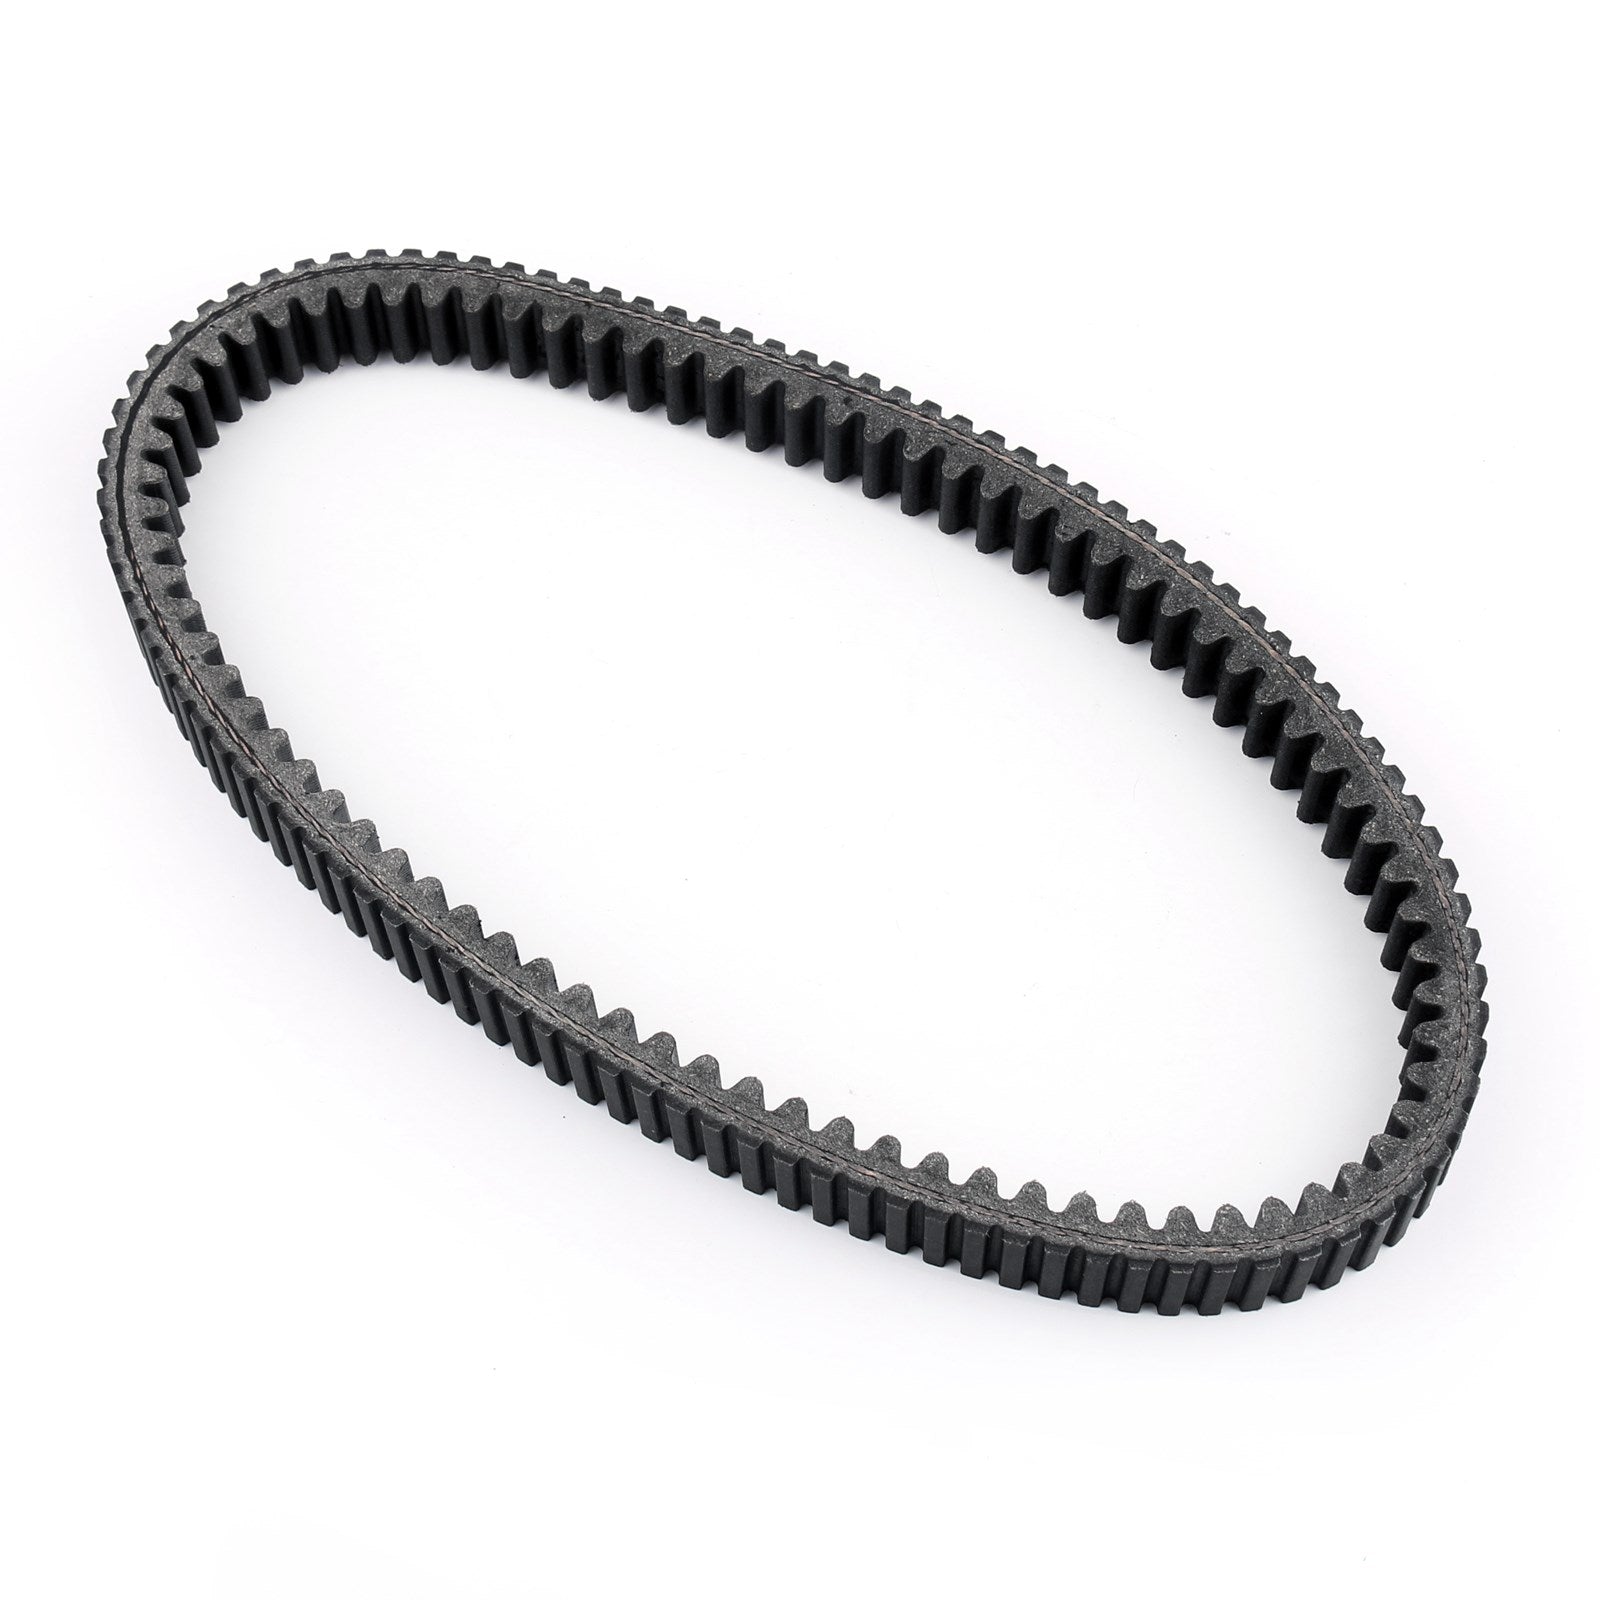 Drive Belt For Can Am Commander Max 1000 14-17 800R 1000 2011-2017 420280360